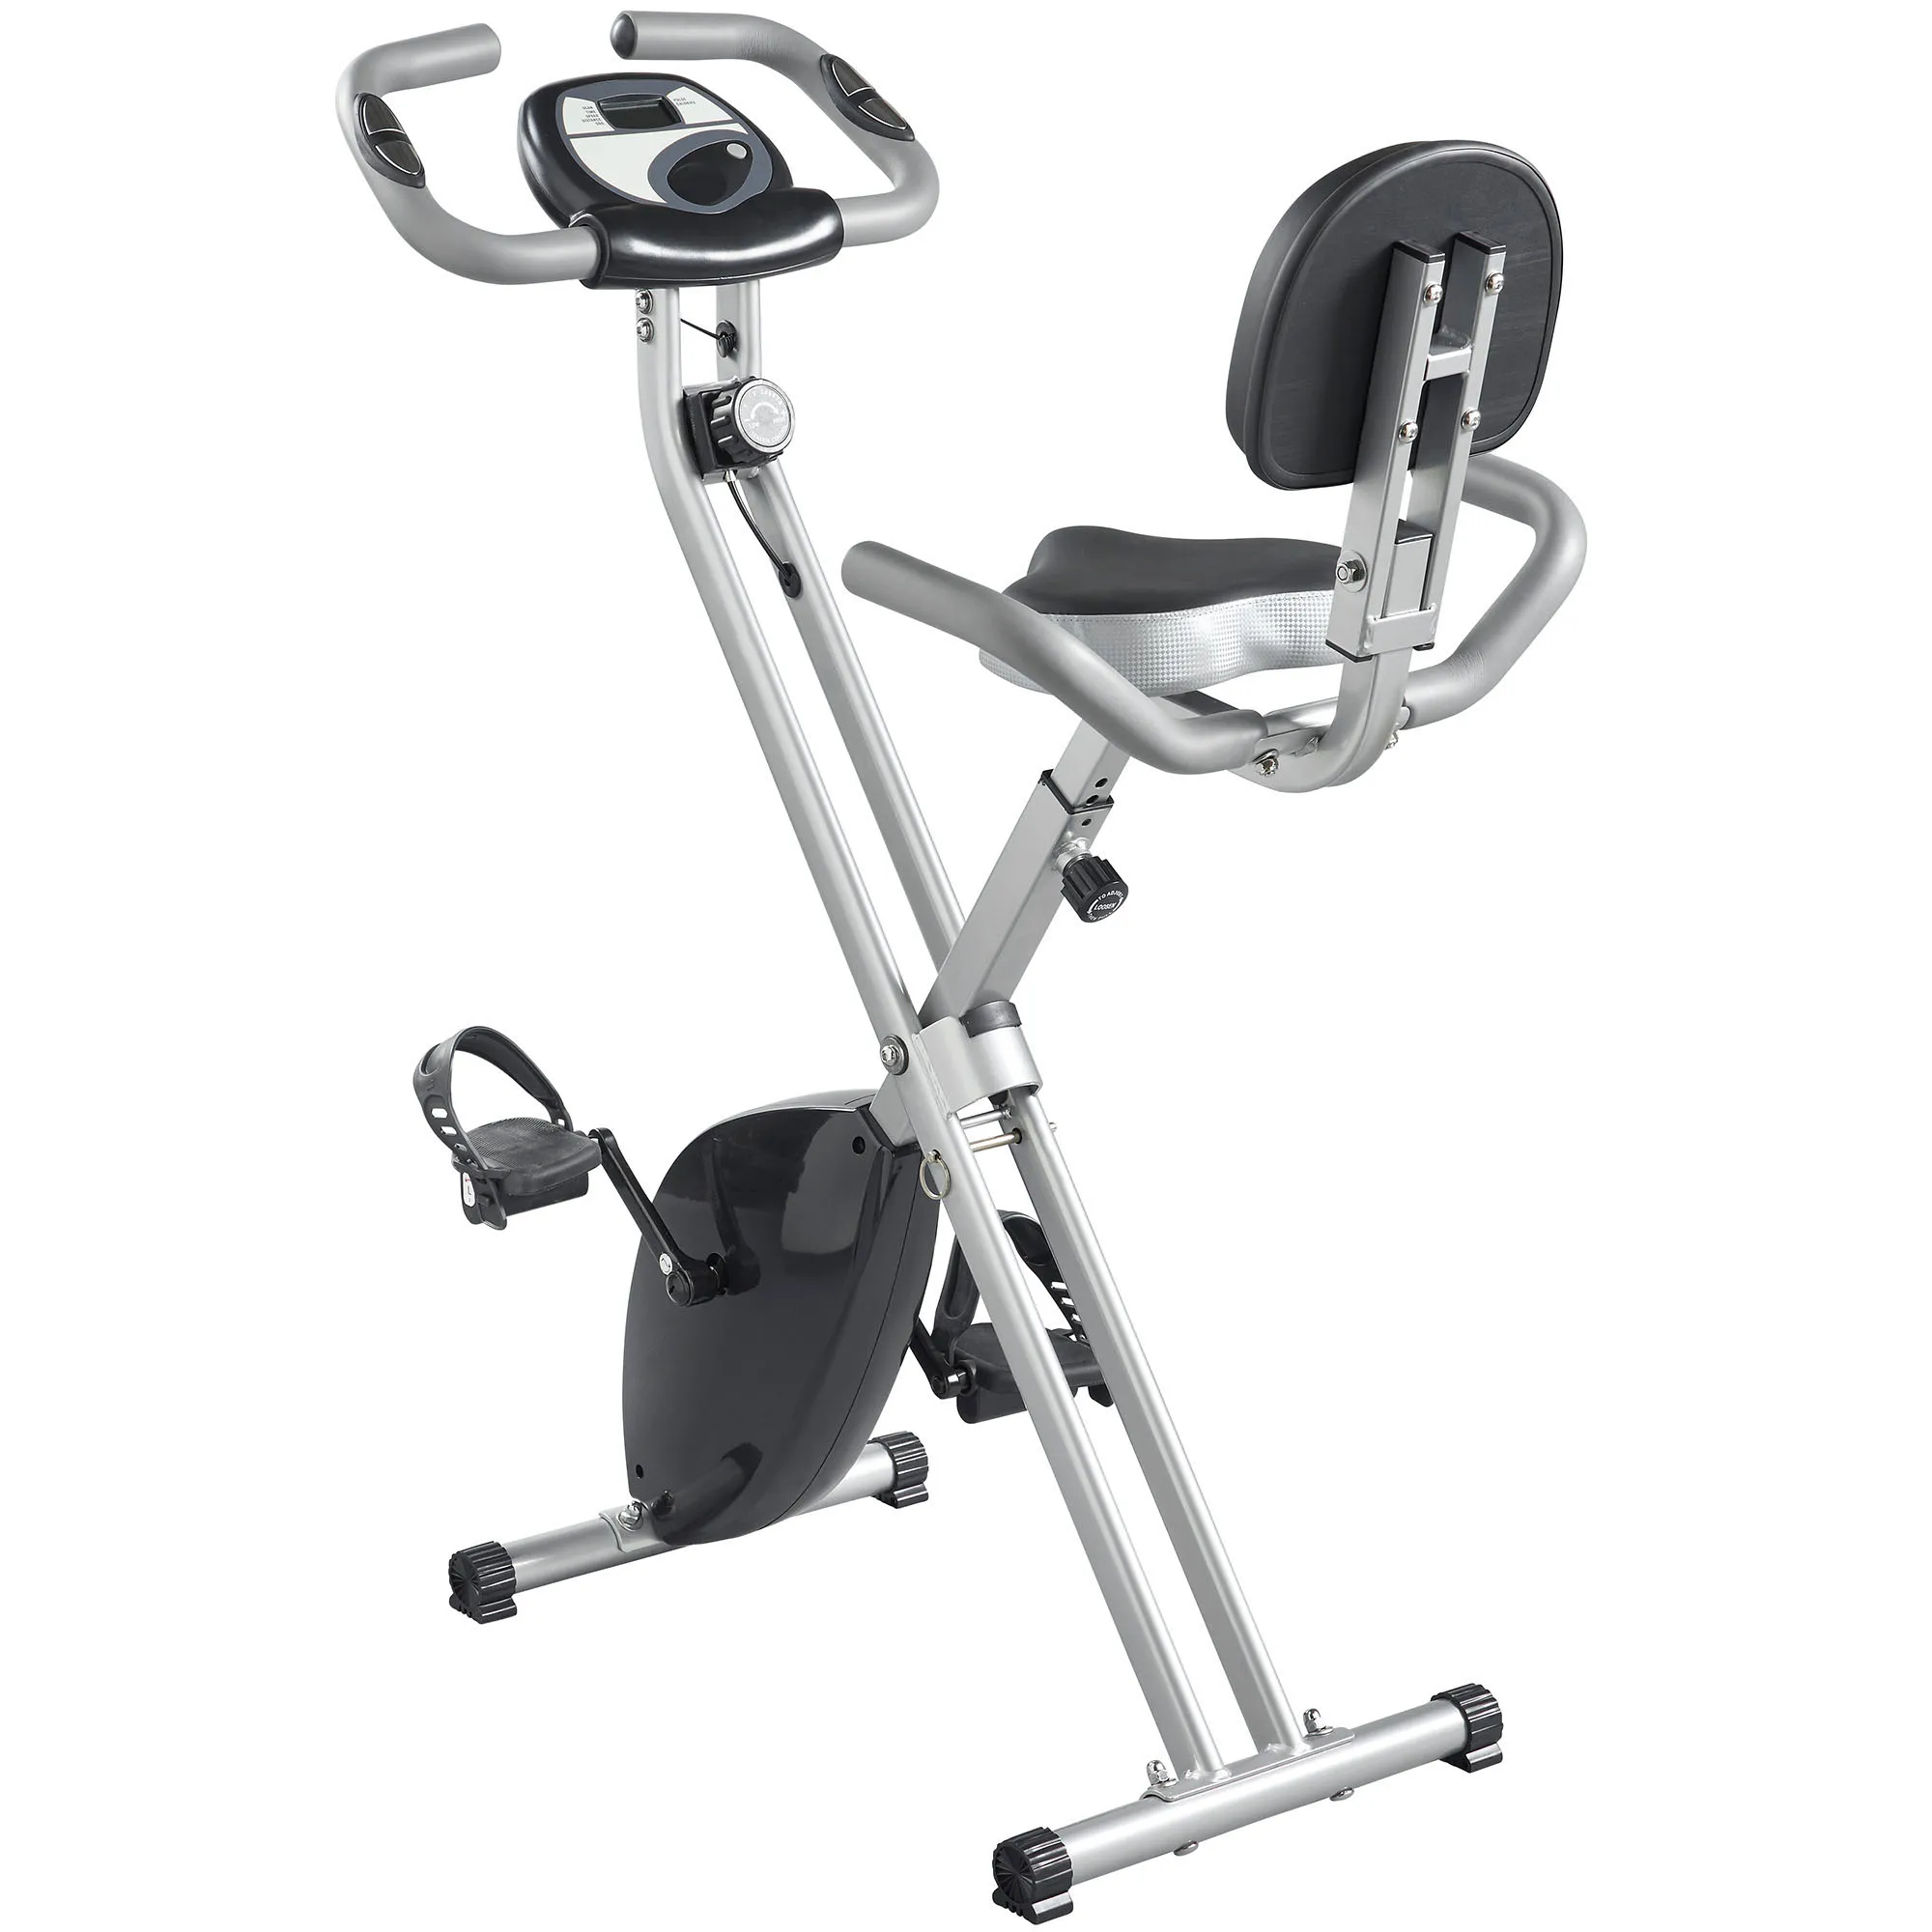 Body Fit Exercise Equipment Spin Bike Machine Exercise Bike Price With ...